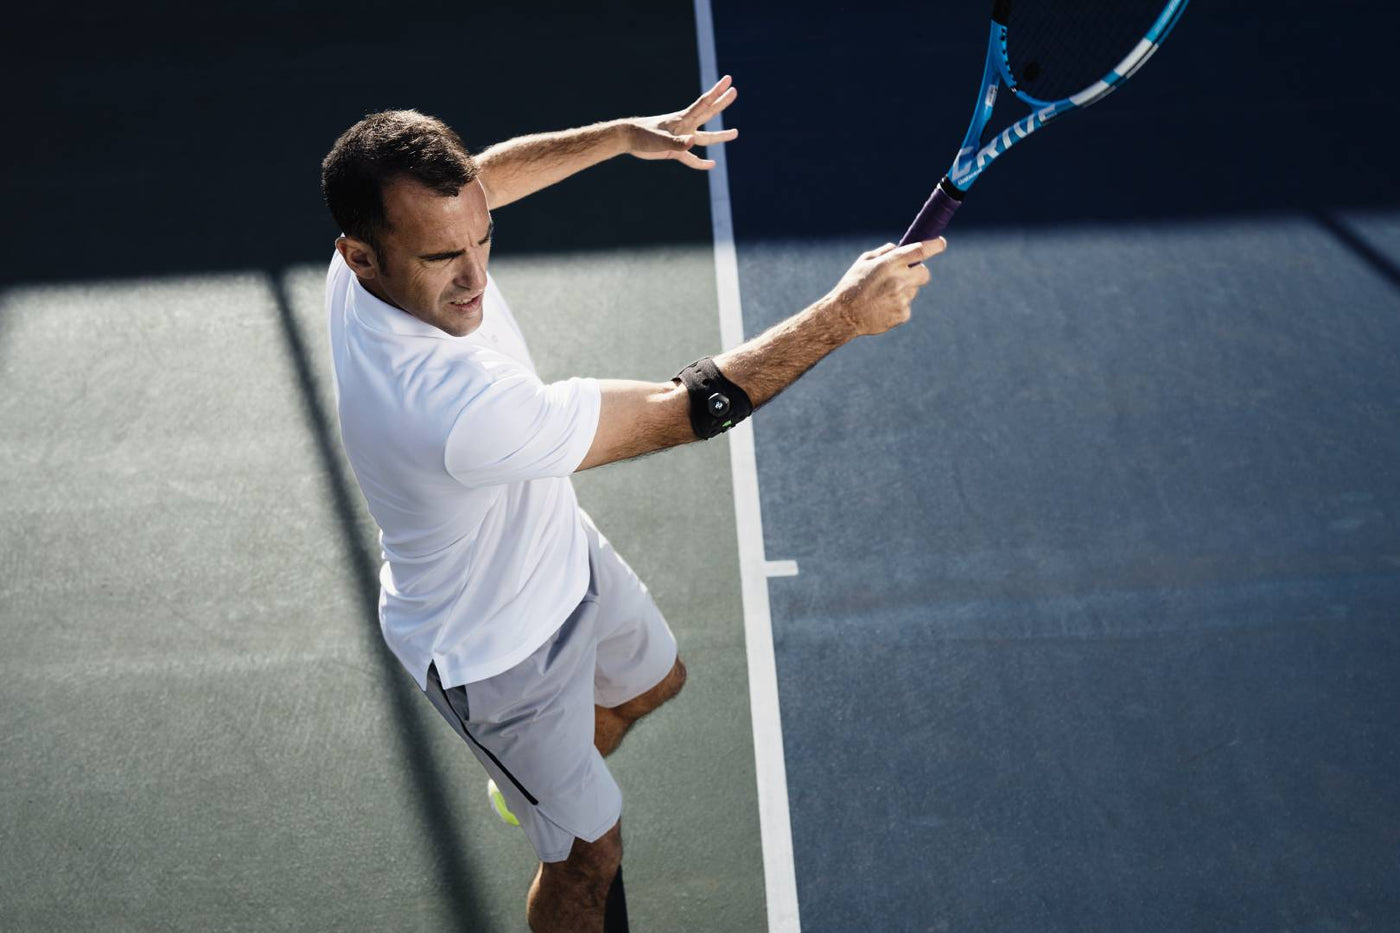 Man playing tennis. He is wearing a white shirt and grey pants. He is also wearing a sports elbow strap, a good support for preventing tennis elbow